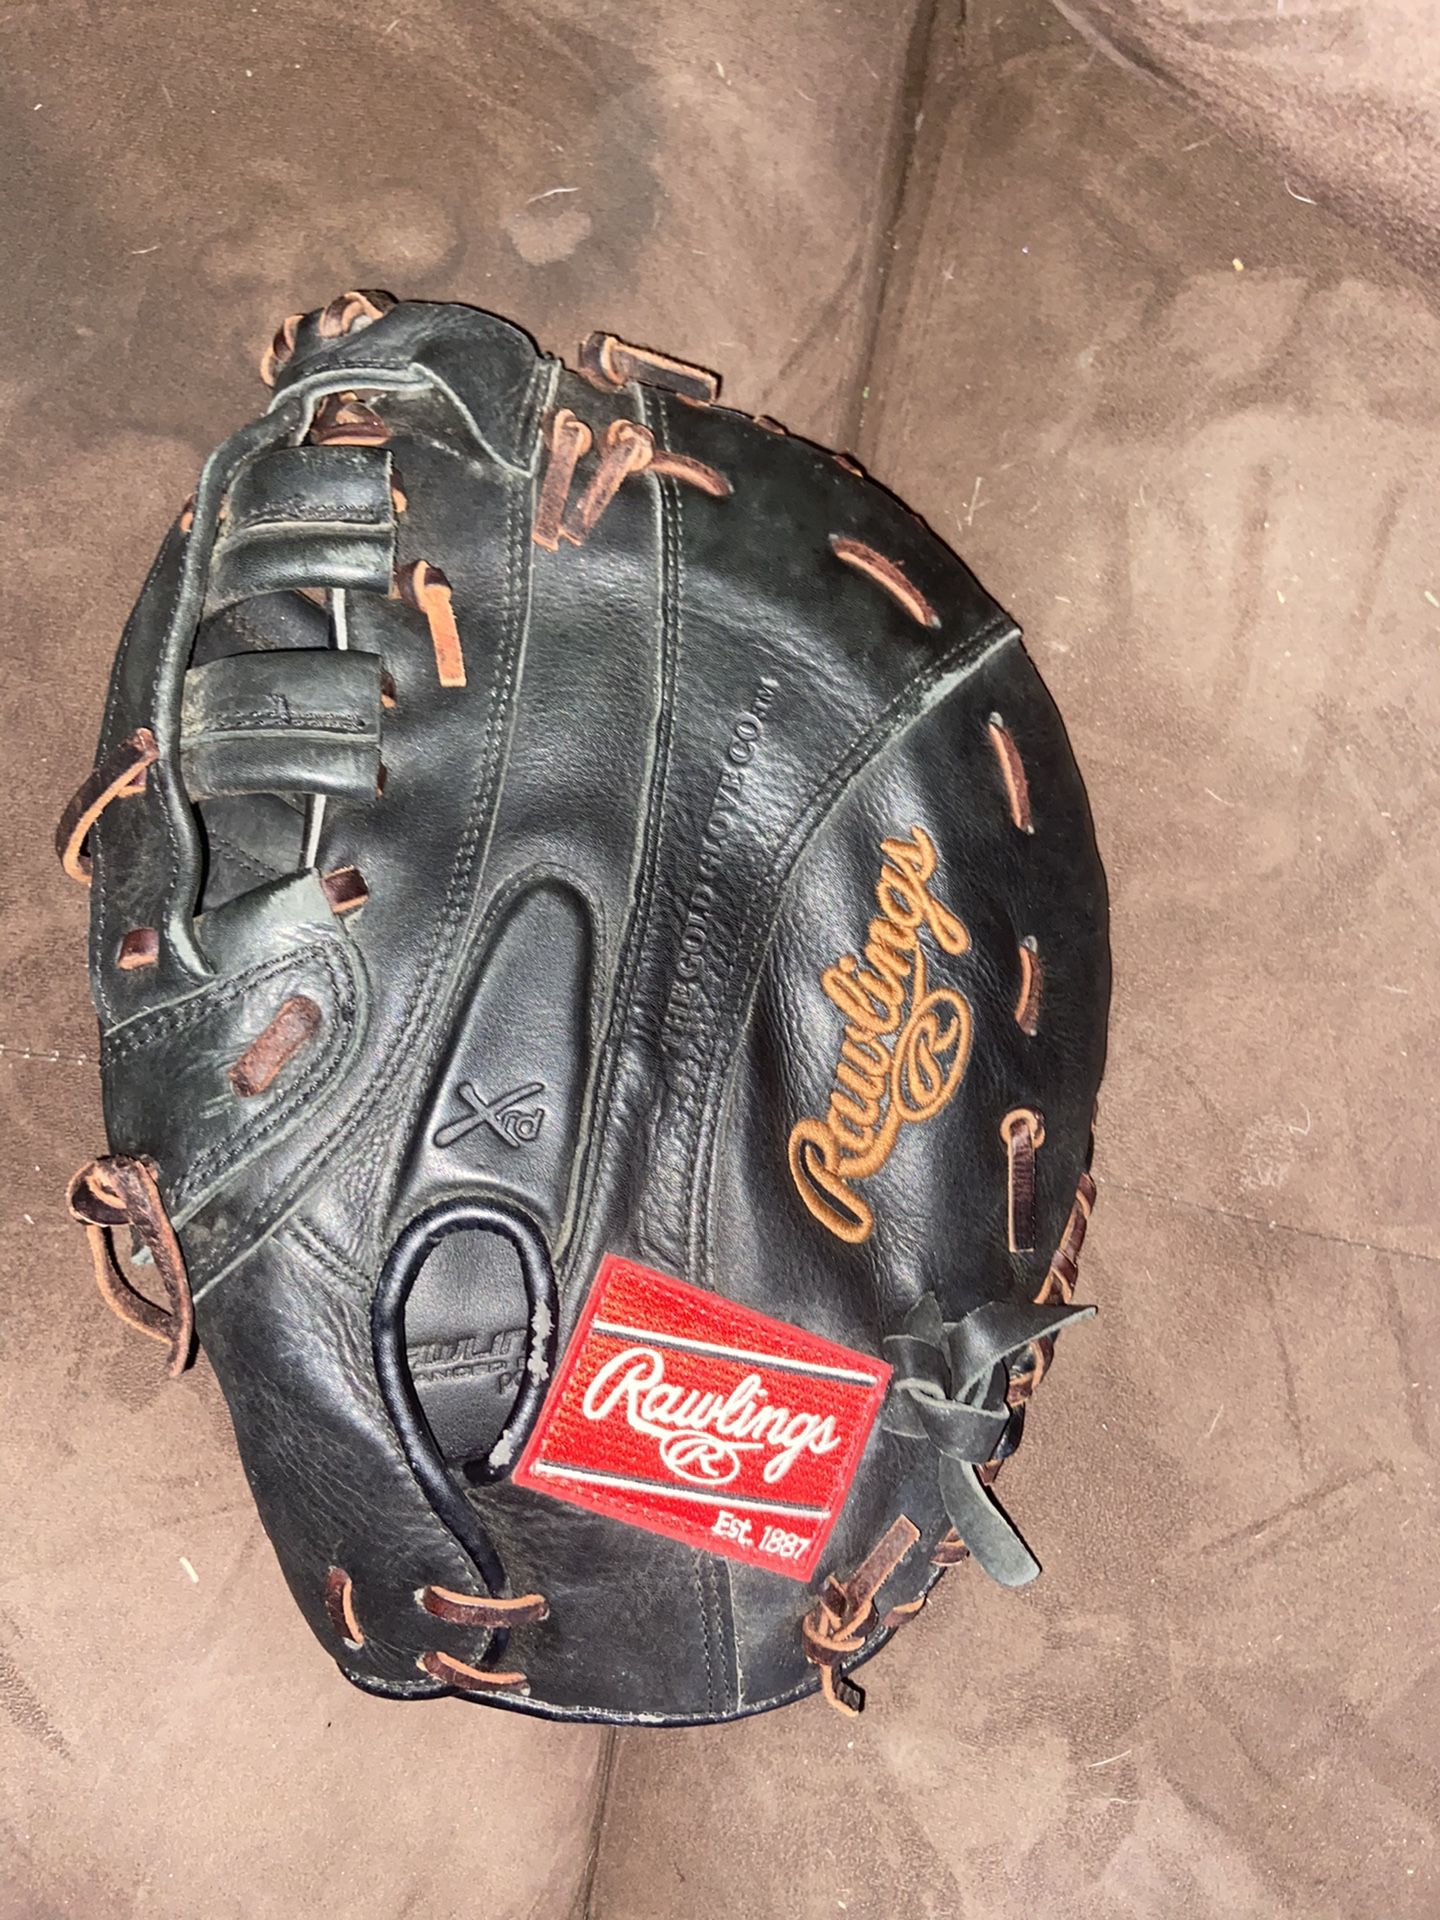 Rawlings 12.5” Left Hand Throw Softball 1st Base Glove / Mitt Excellent Condition